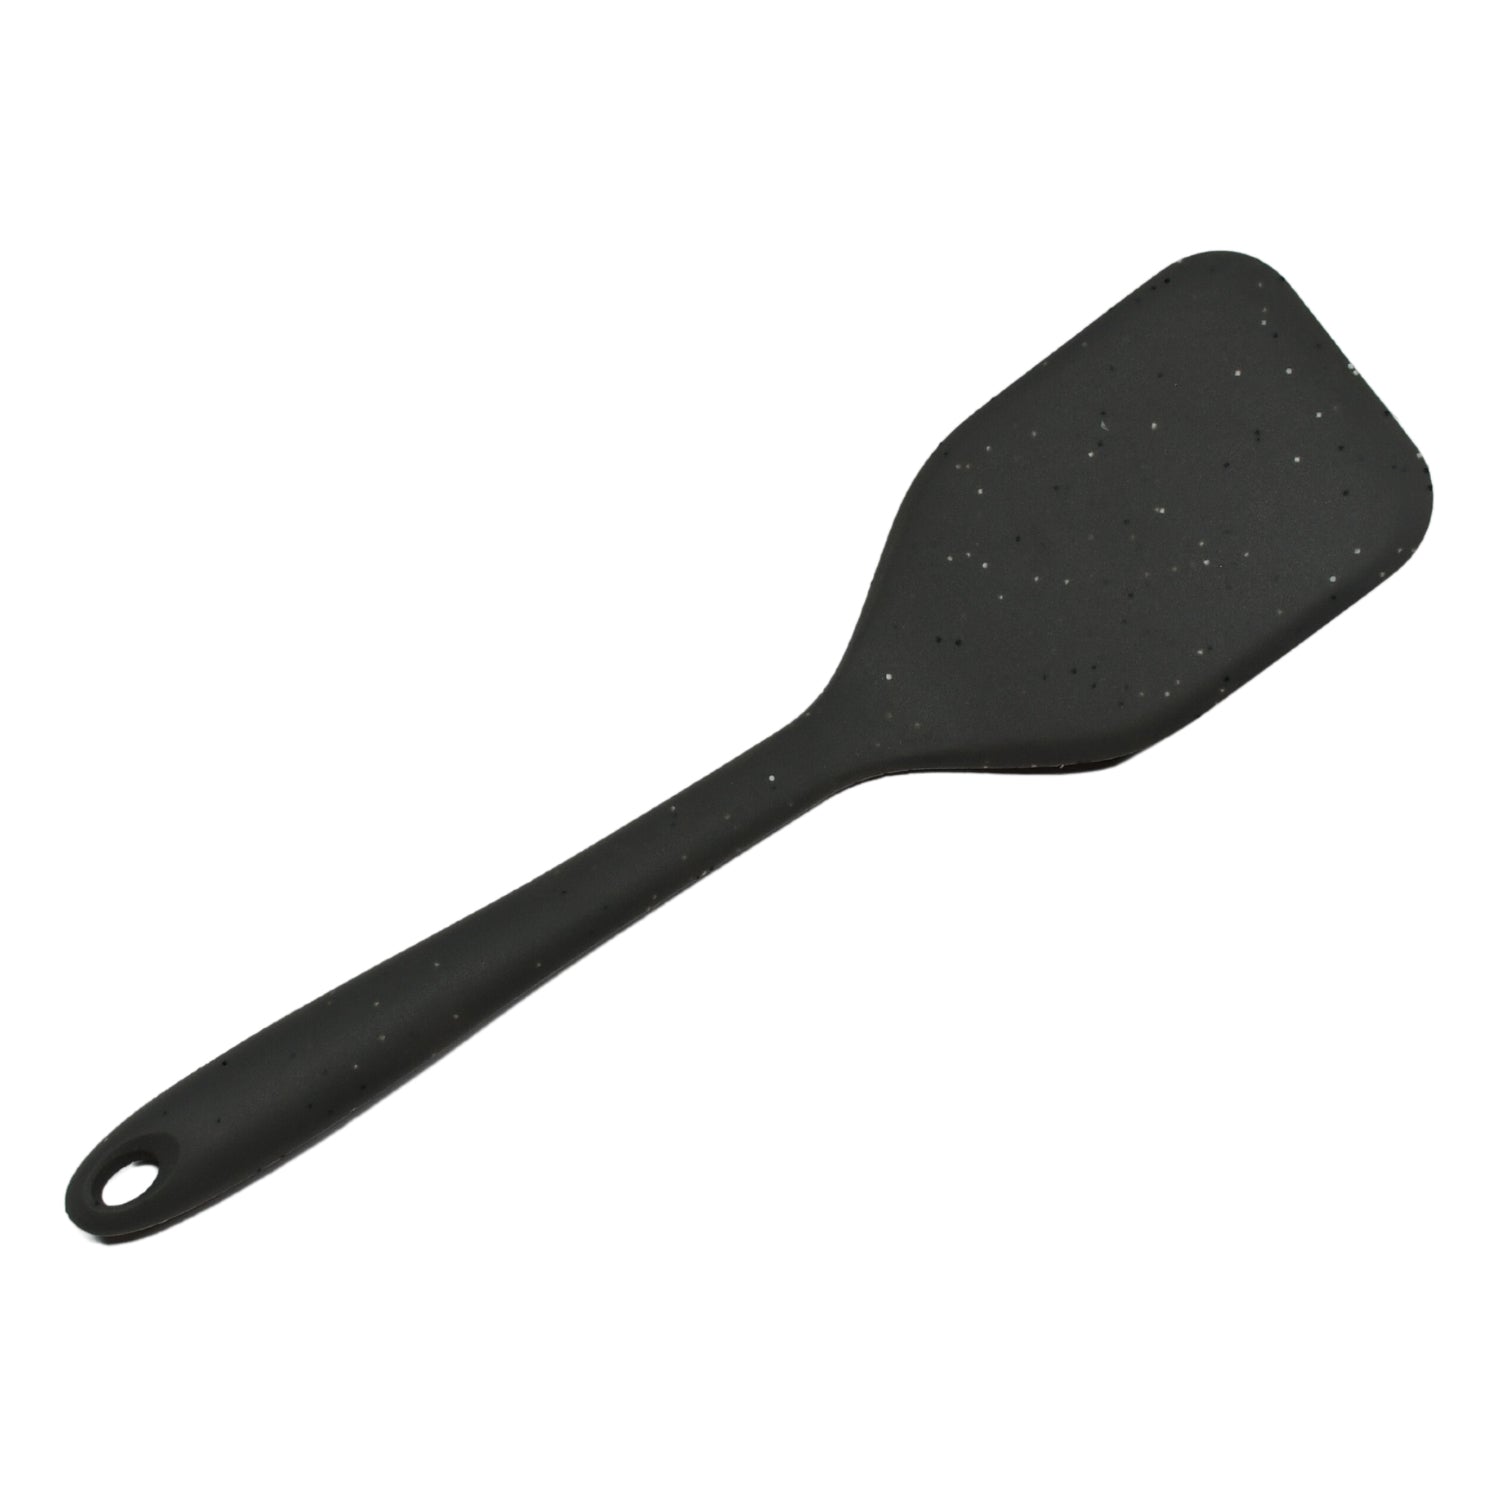 5396 Silicone Spatula - Versatile Tool for Cooking, Baking and Mixing, Set of 1. DeoDap